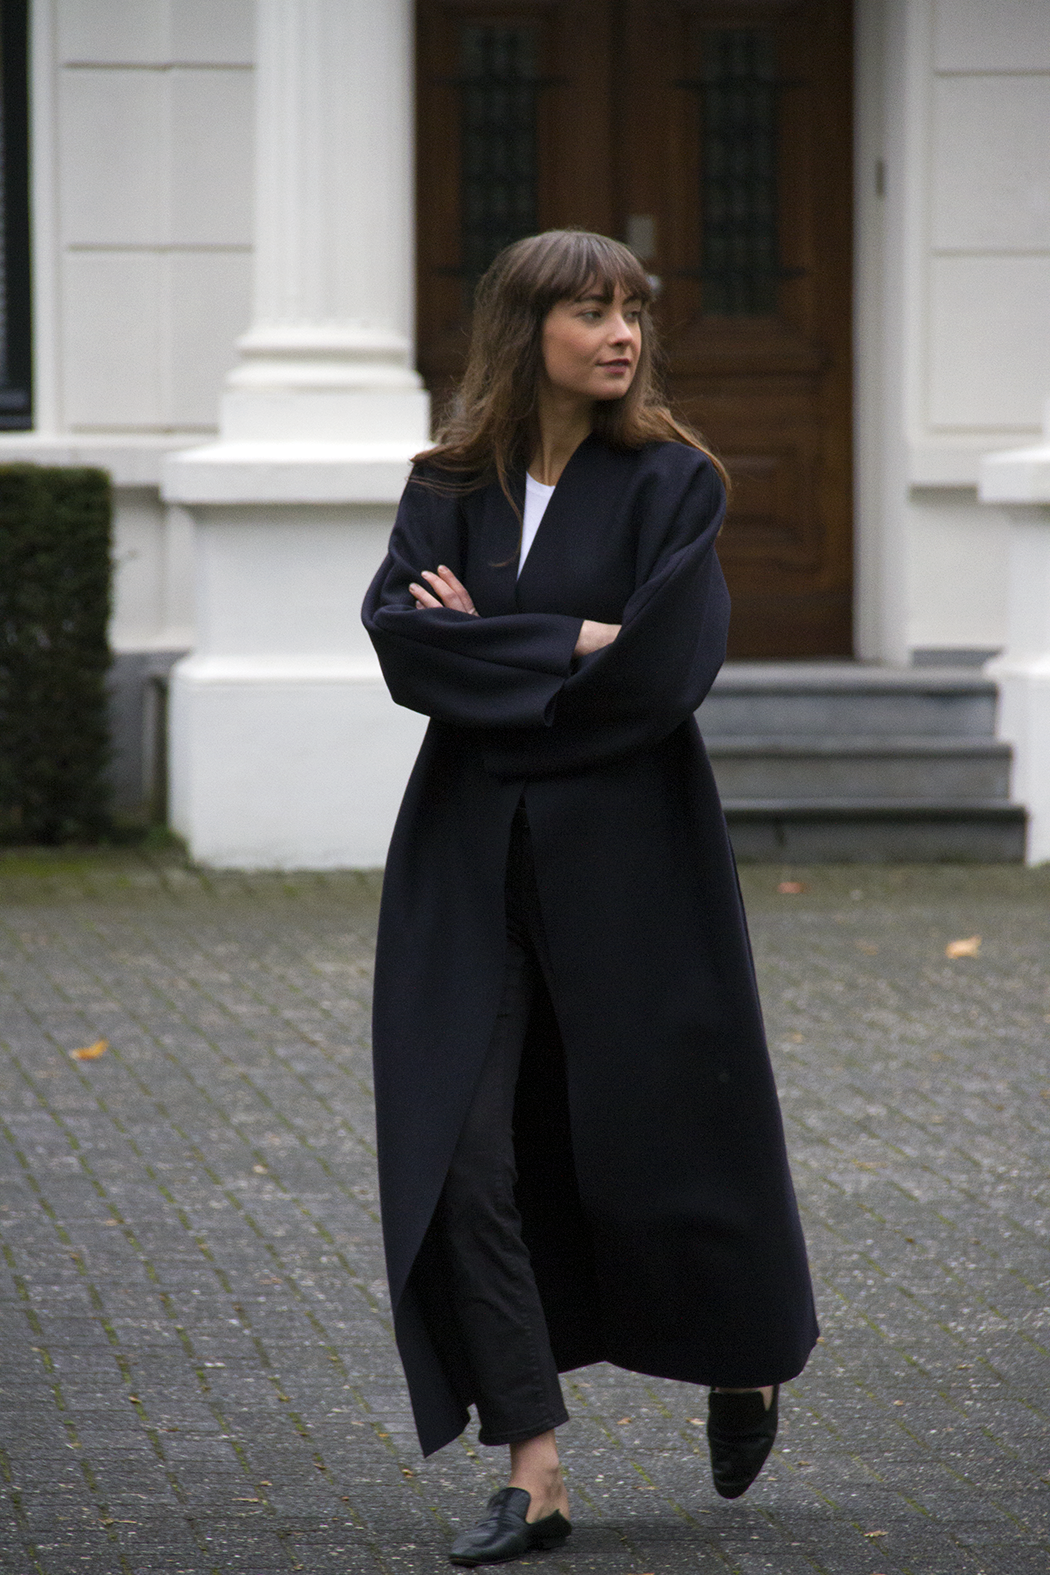 Look Chic and Sophisticated in a Stylish
Long Black Coat: Timeless and Versatile